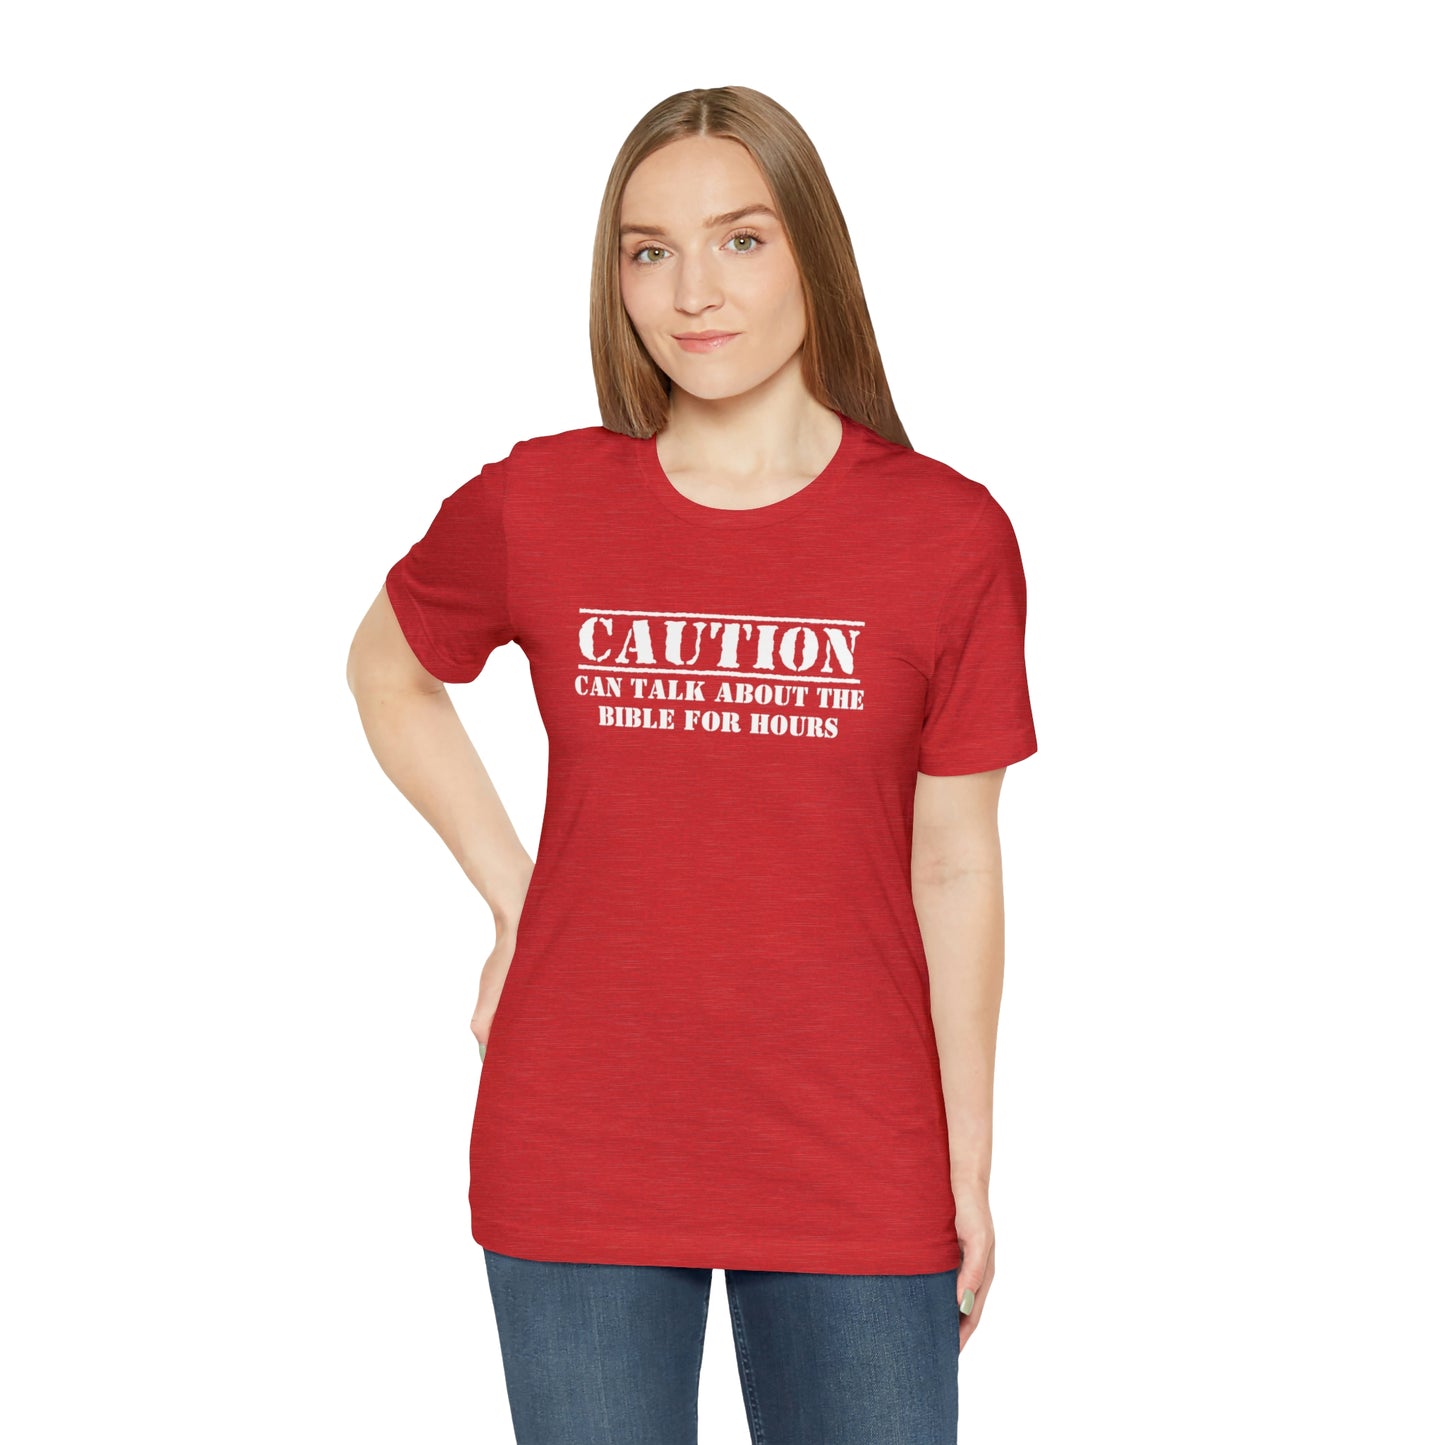 Caution Can Talk About the Bible for Hours Shirt